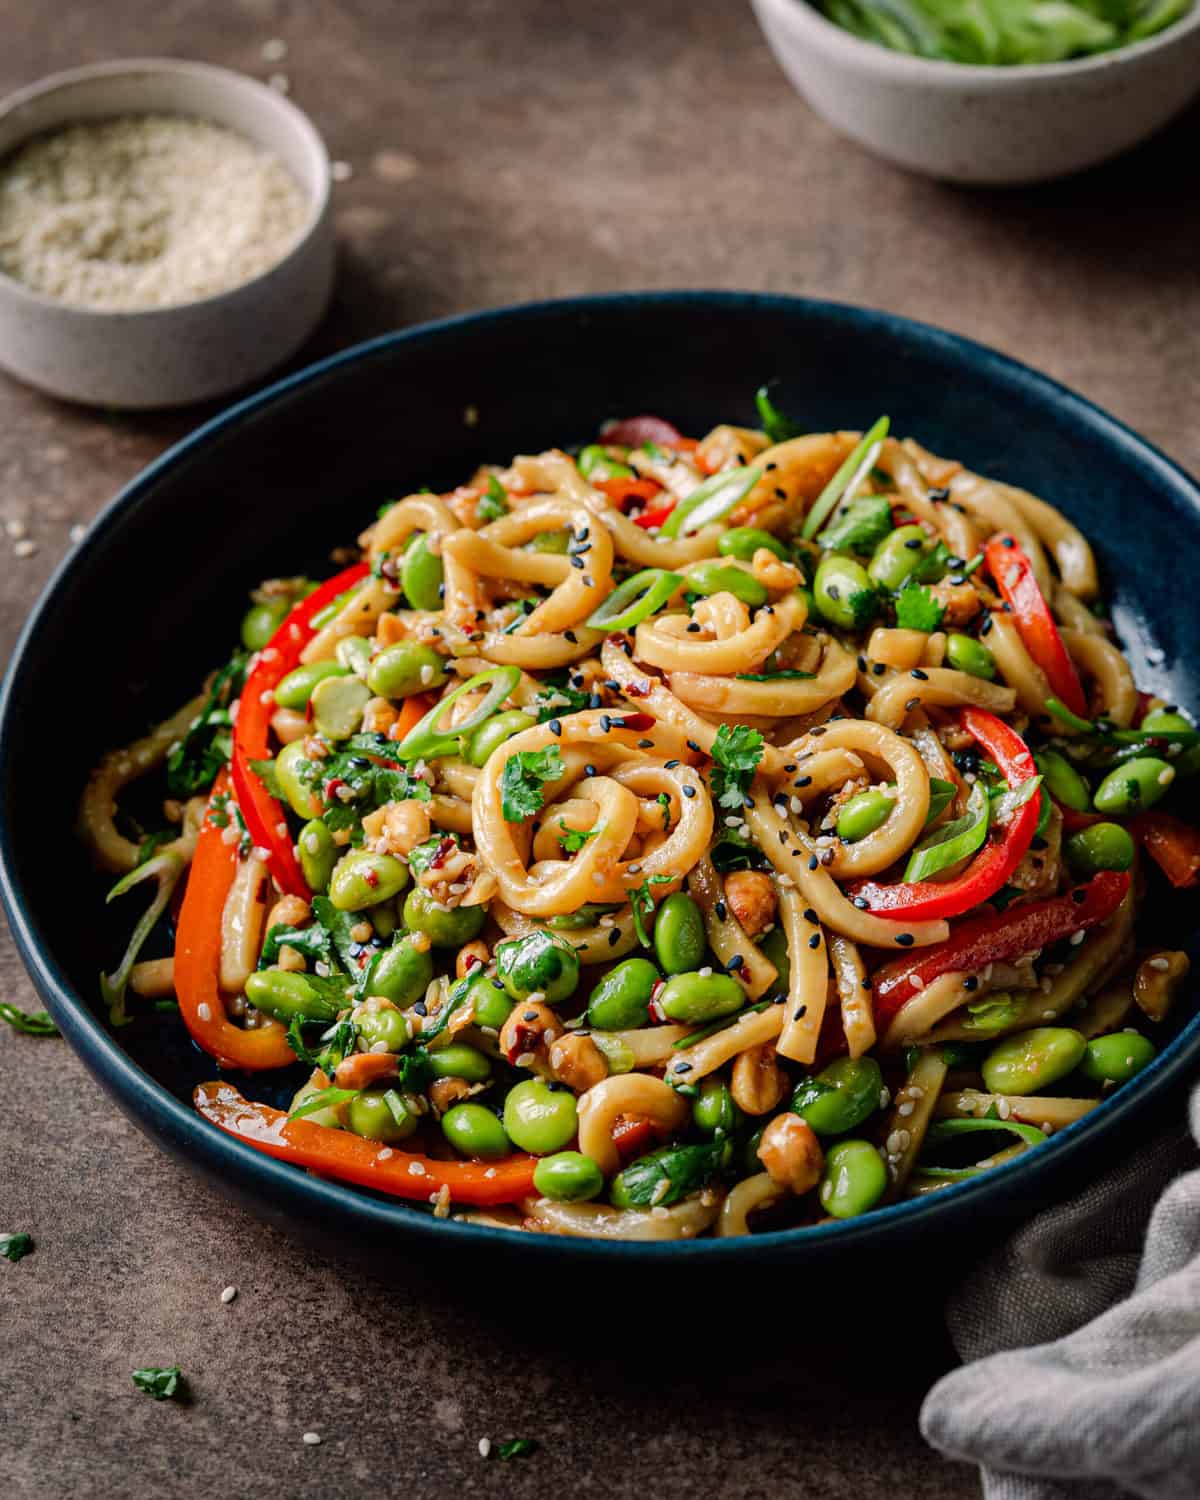 vegan noodles with chili garlic sauce and bell peppers in navy blue bowl on brown backdrop, with bowl of scallions and bowl of sesame seeds